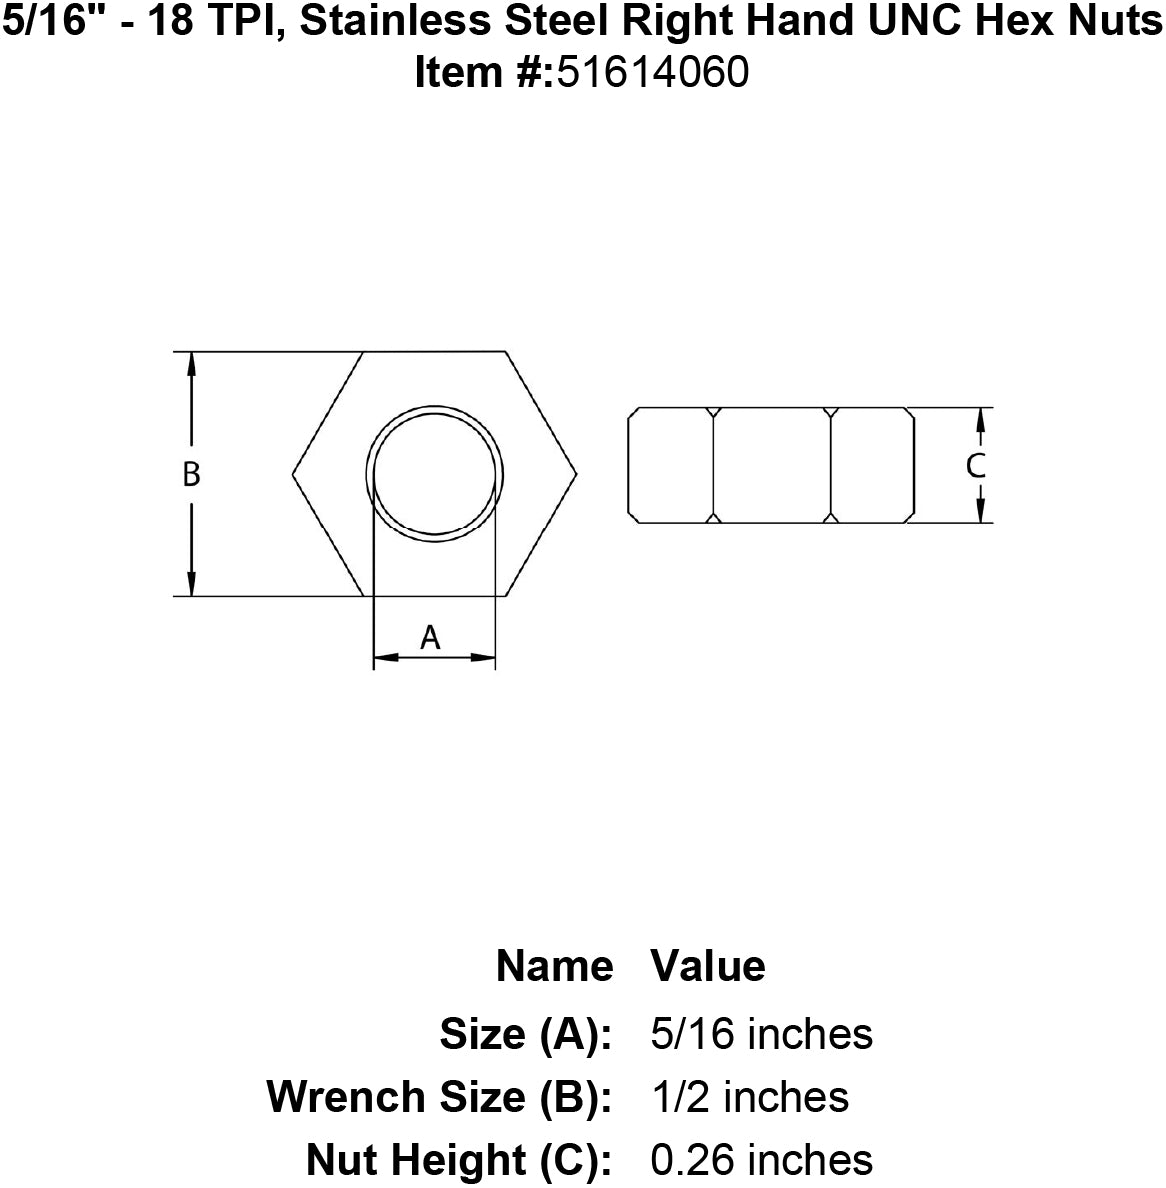 Stainless Hex Nuts - UNC Right Hand